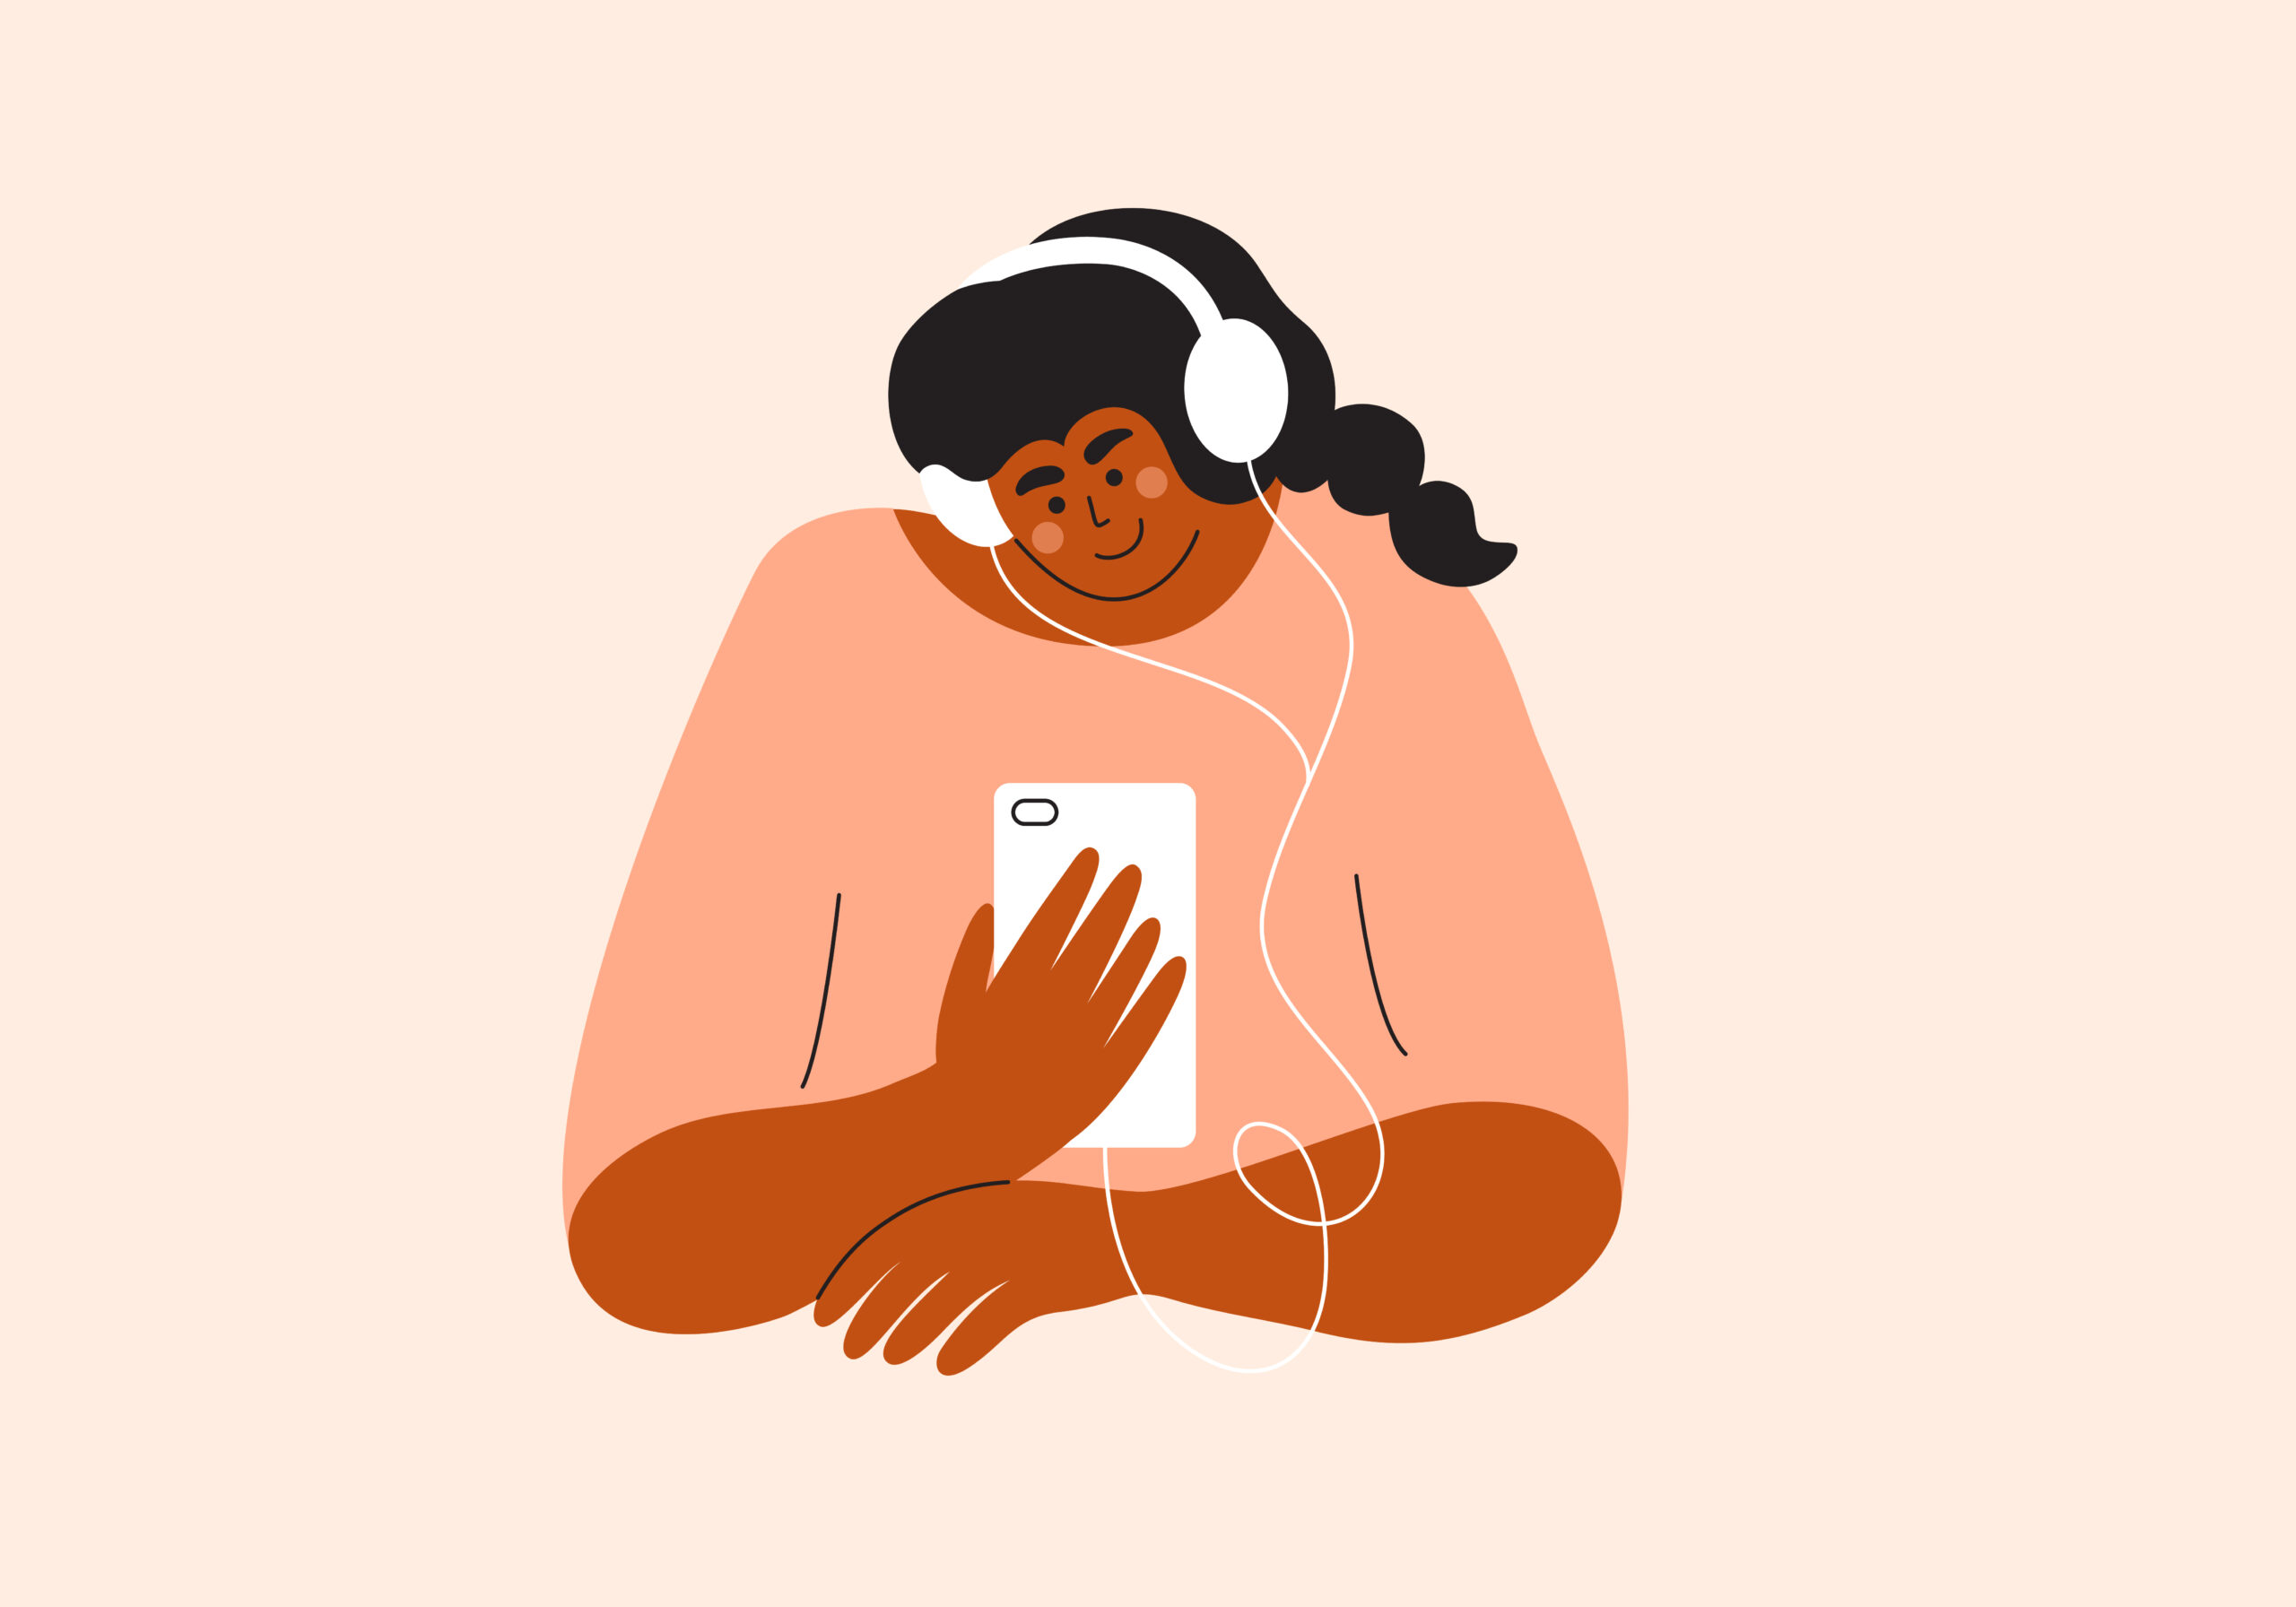 Graphic of person wearing headphones and looking at their phone